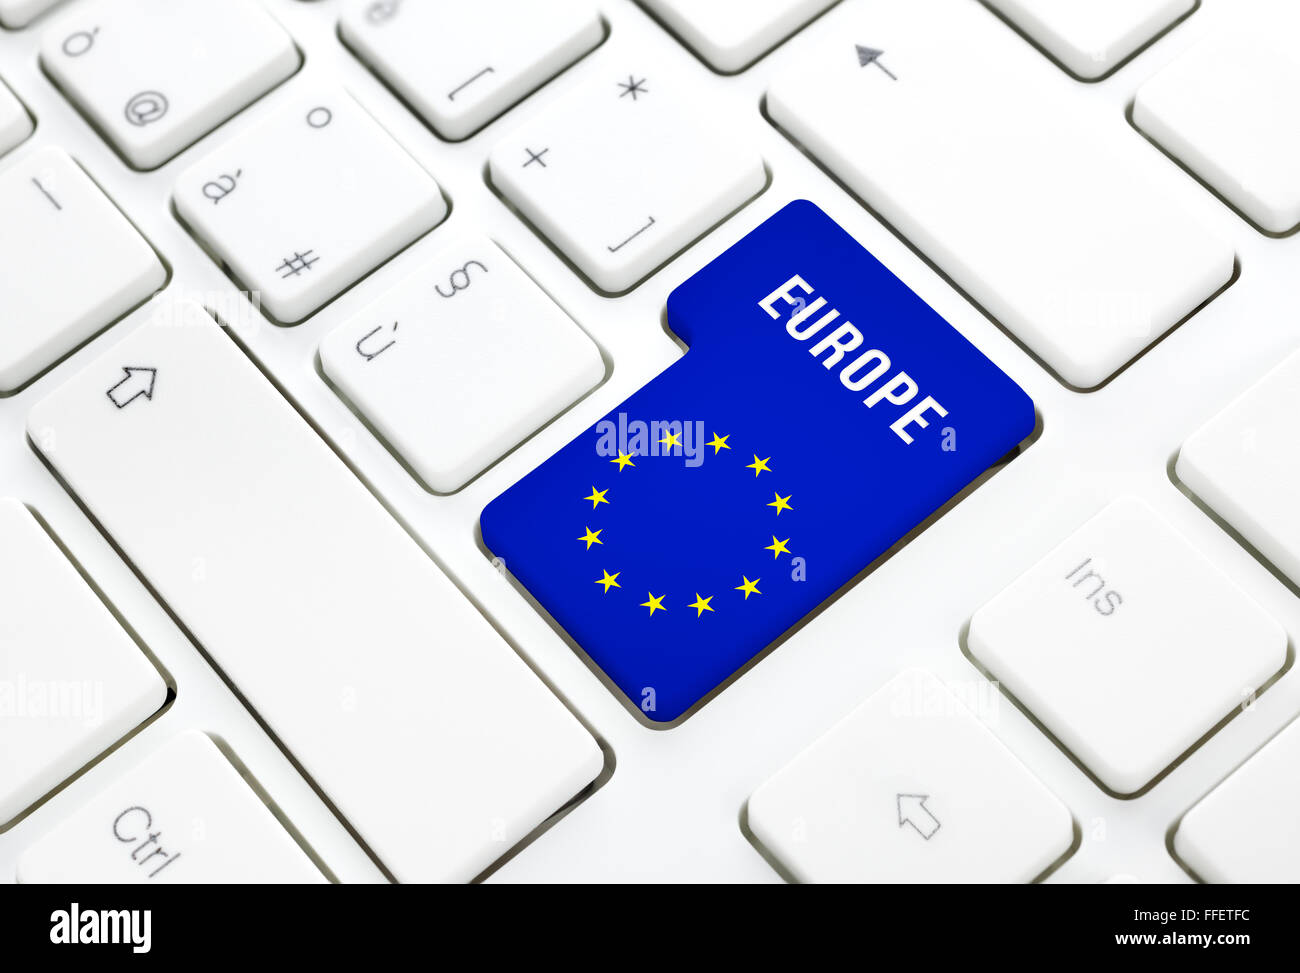 Europe web concept, blue and star flag enter button or key on white keyboard photography. Stock Photo